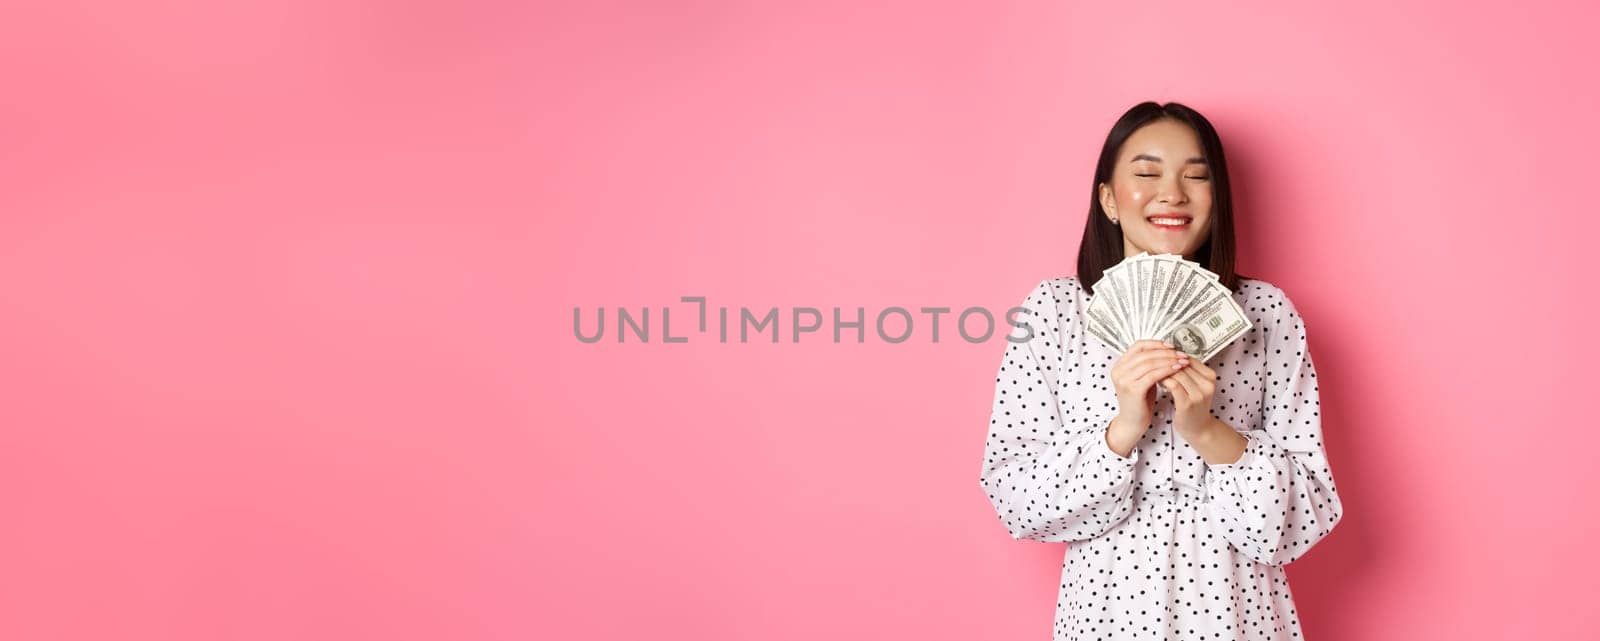 Shopping concept. Happy and satisfied asian woman winning prize money, showing dollars and rejoicing, standing over pink background.